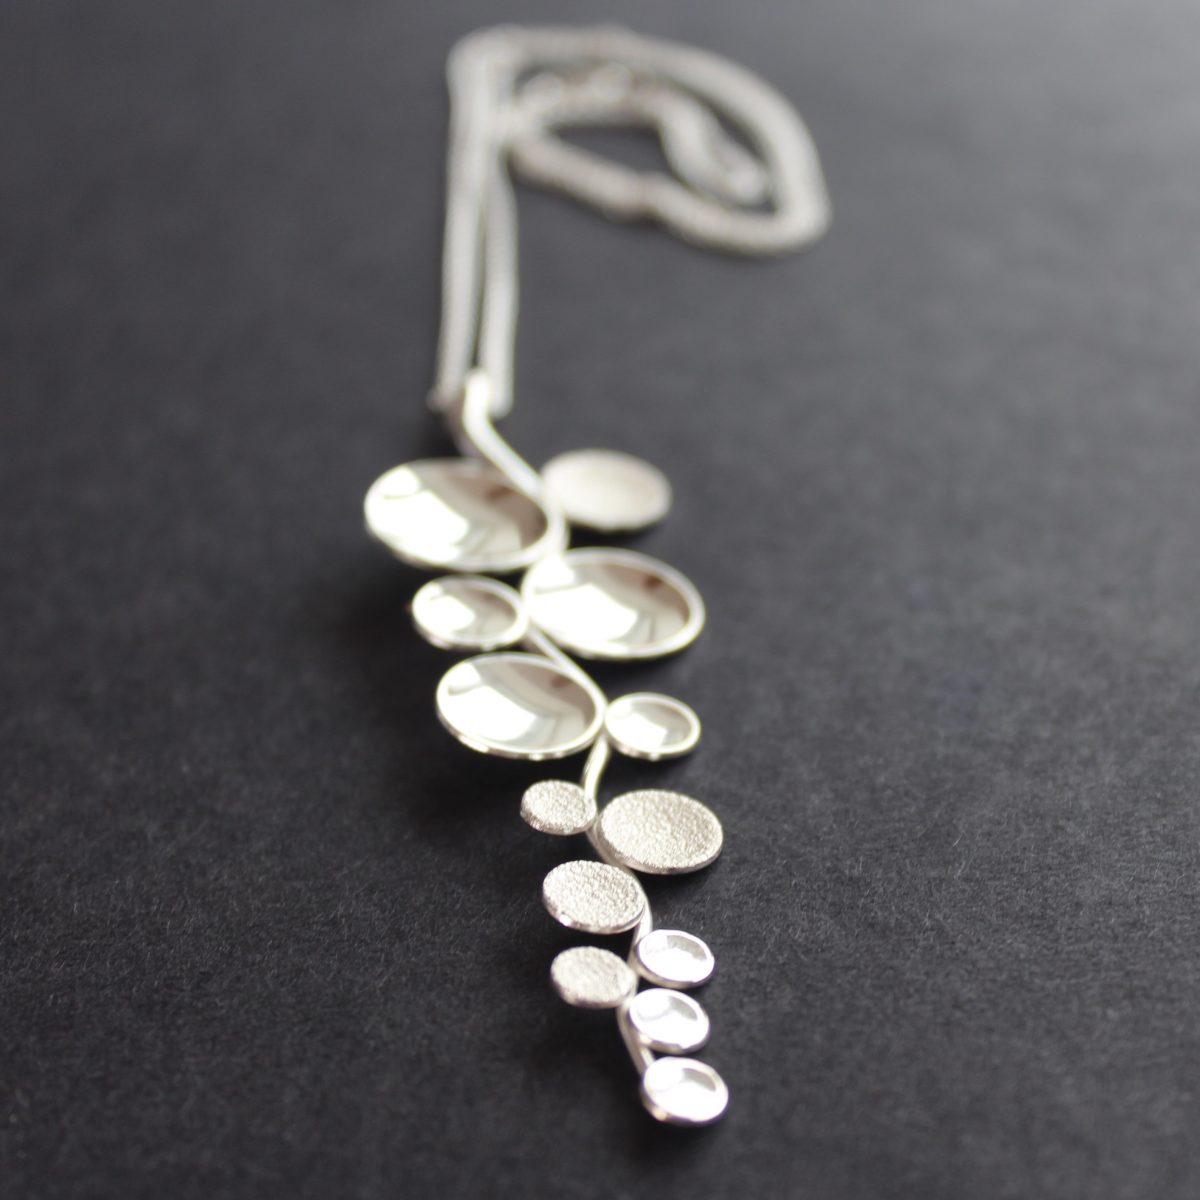 Long sliver pendant of small circles attached to central curved line made by Beverly Bartlett 